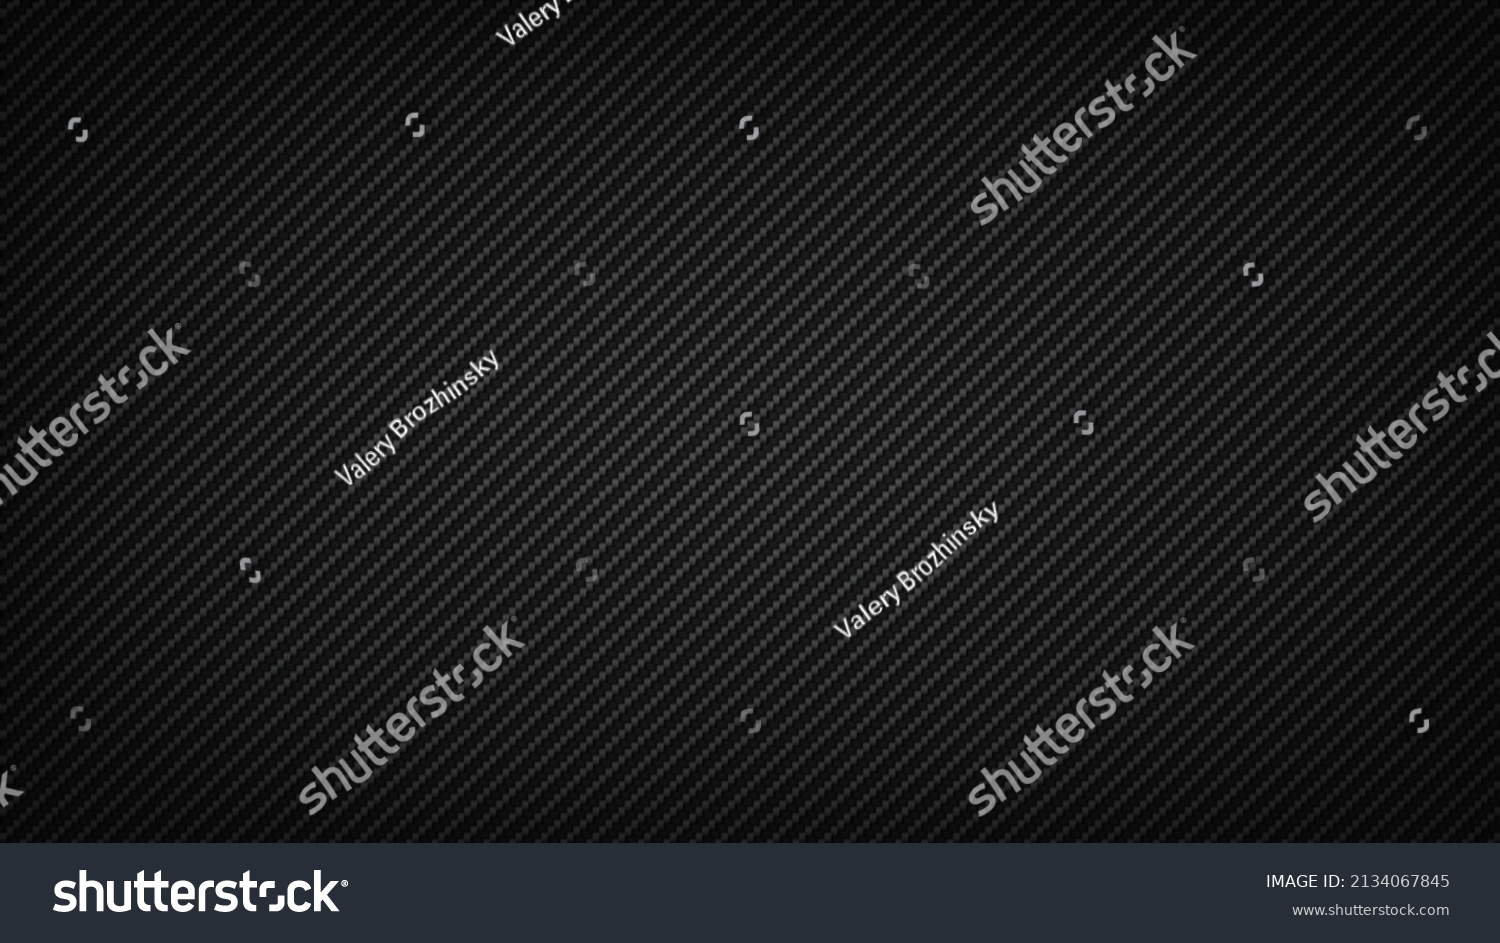 SVG of Carbon fiber texture, background. Dark gray carbon, black and white texture. Auto racing theme design element, graphic. Vector illustration svg